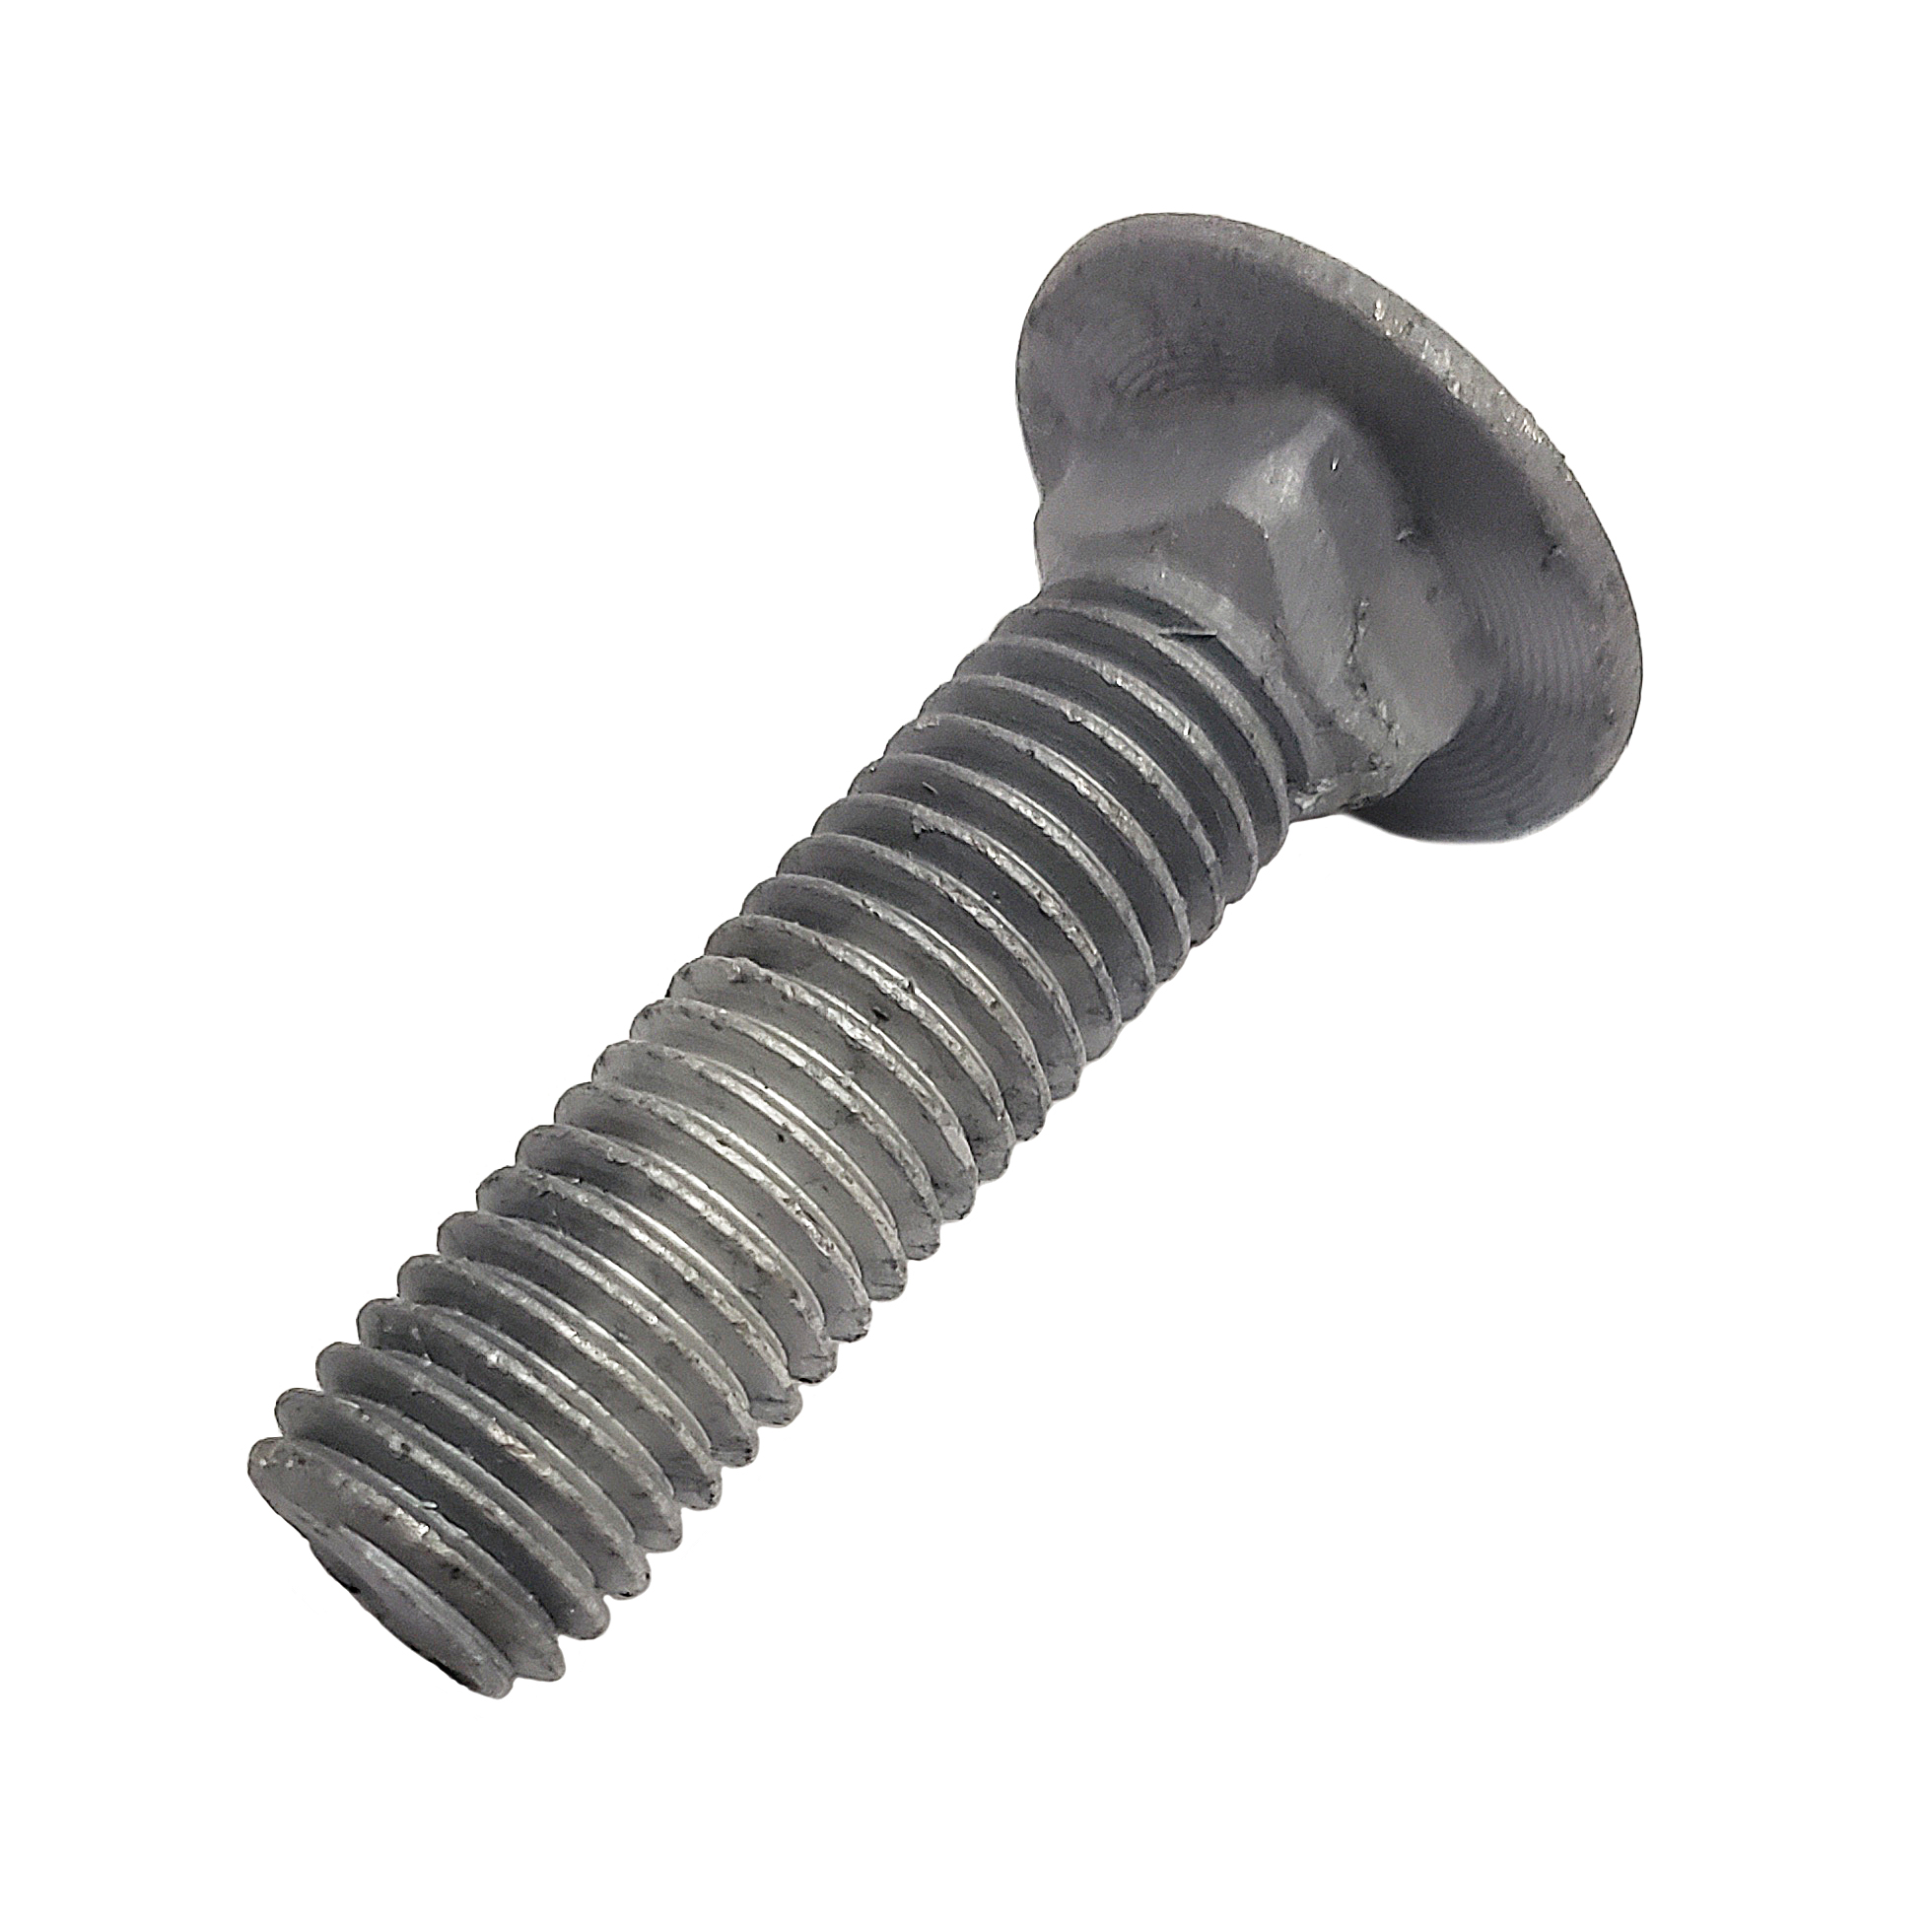 Carriage Bolt Hot Dipped Galvanized Bolts Qty-100 1/2"-13 x 16" PT 